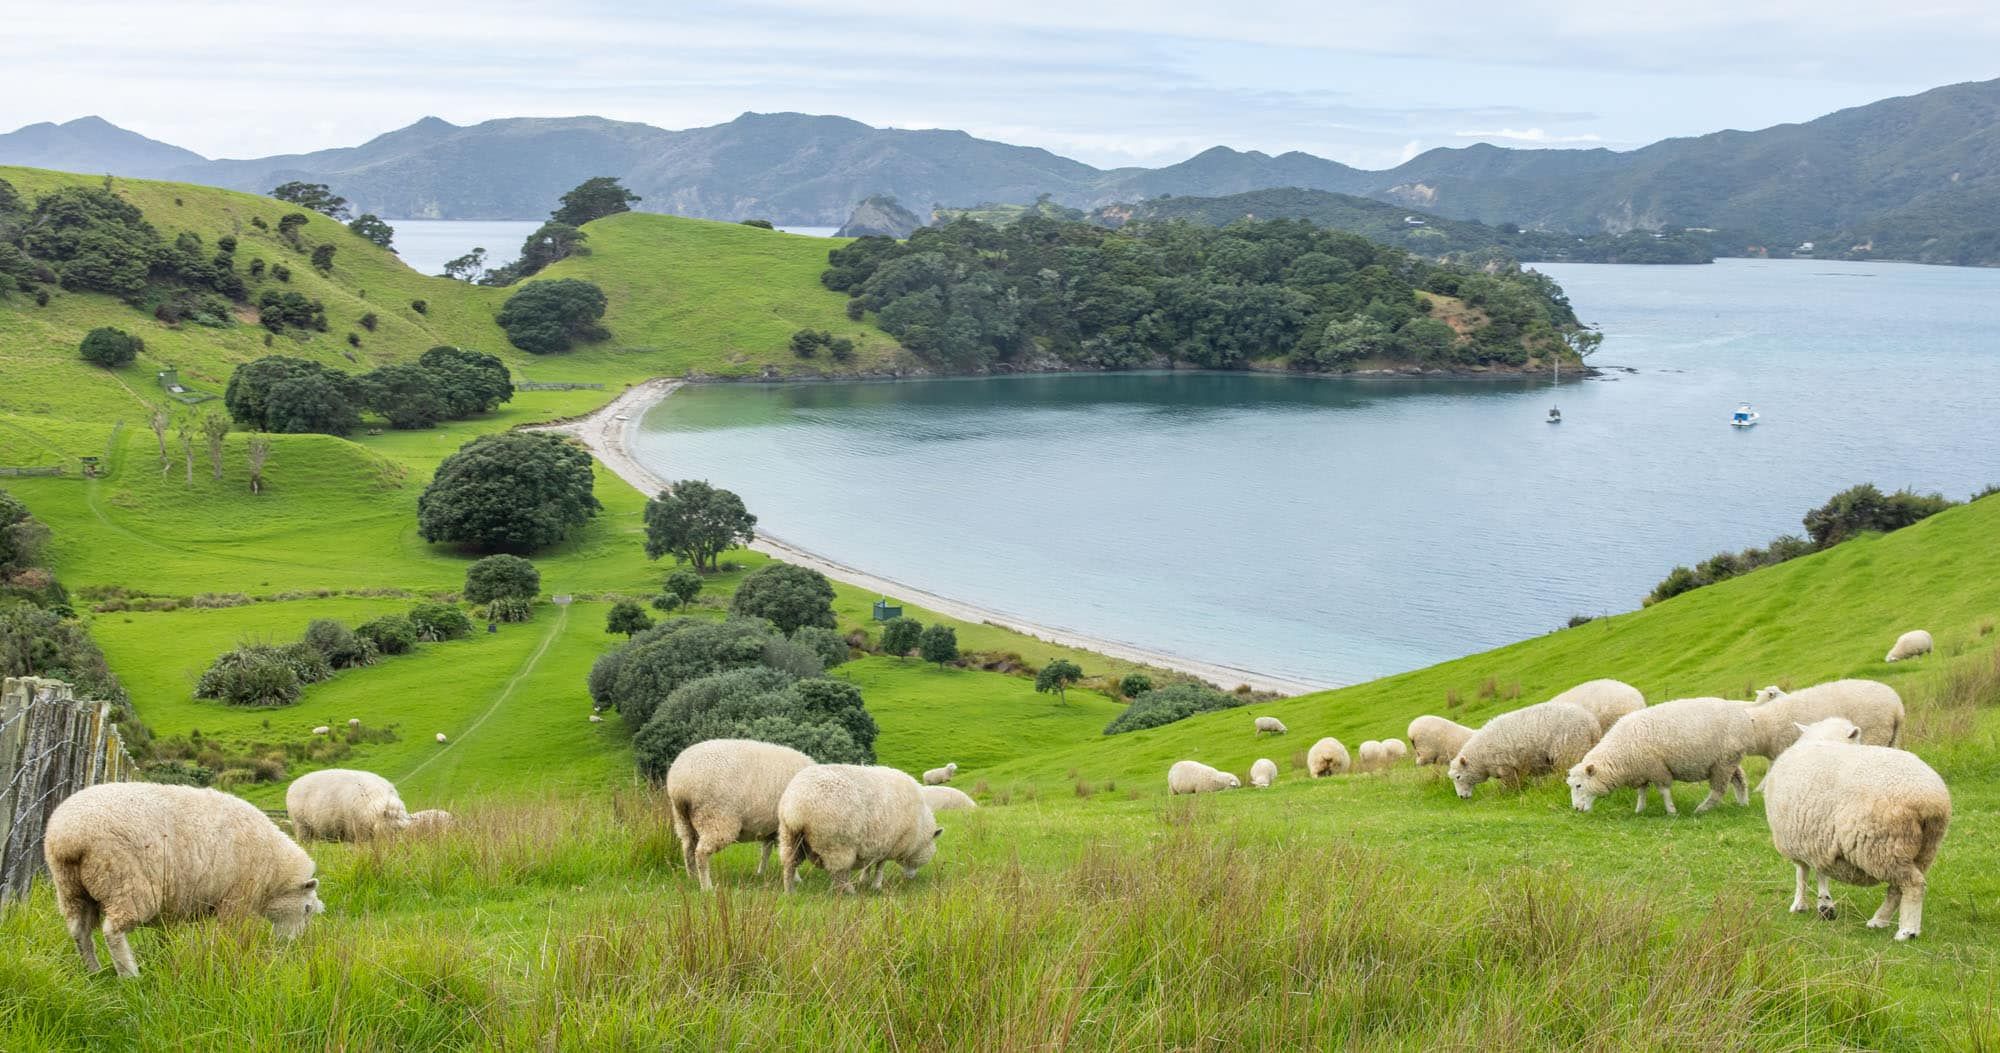 Featured image for “Paihia, New Zealand: Best Things to Do, Day Trip Ideas & Bay of Islands Tours”